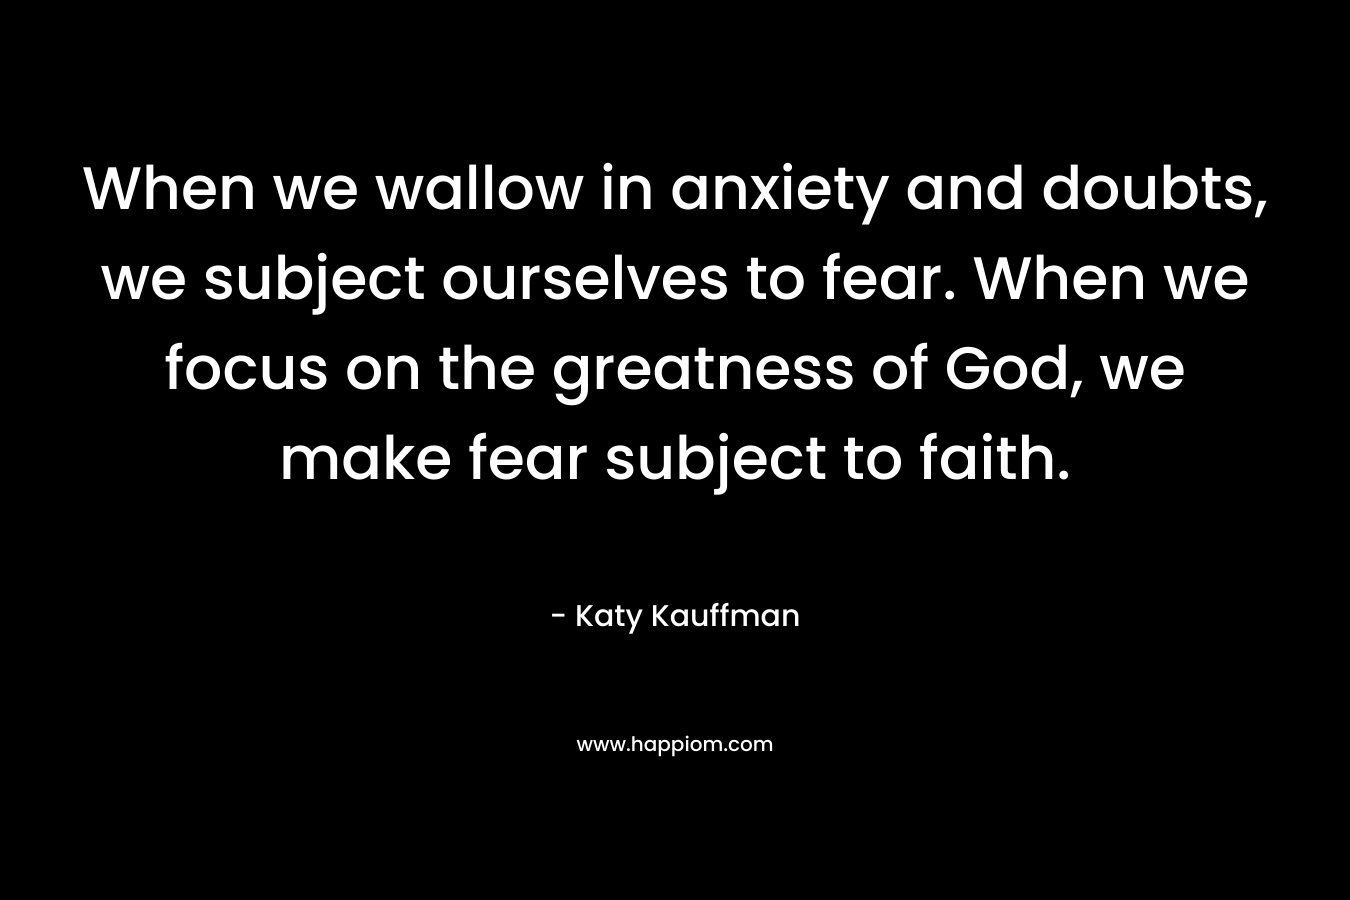 When we wallow in anxiety and doubts, we subject ourselves to fear. When we focus on the greatness of God, we make fear subject to faith.